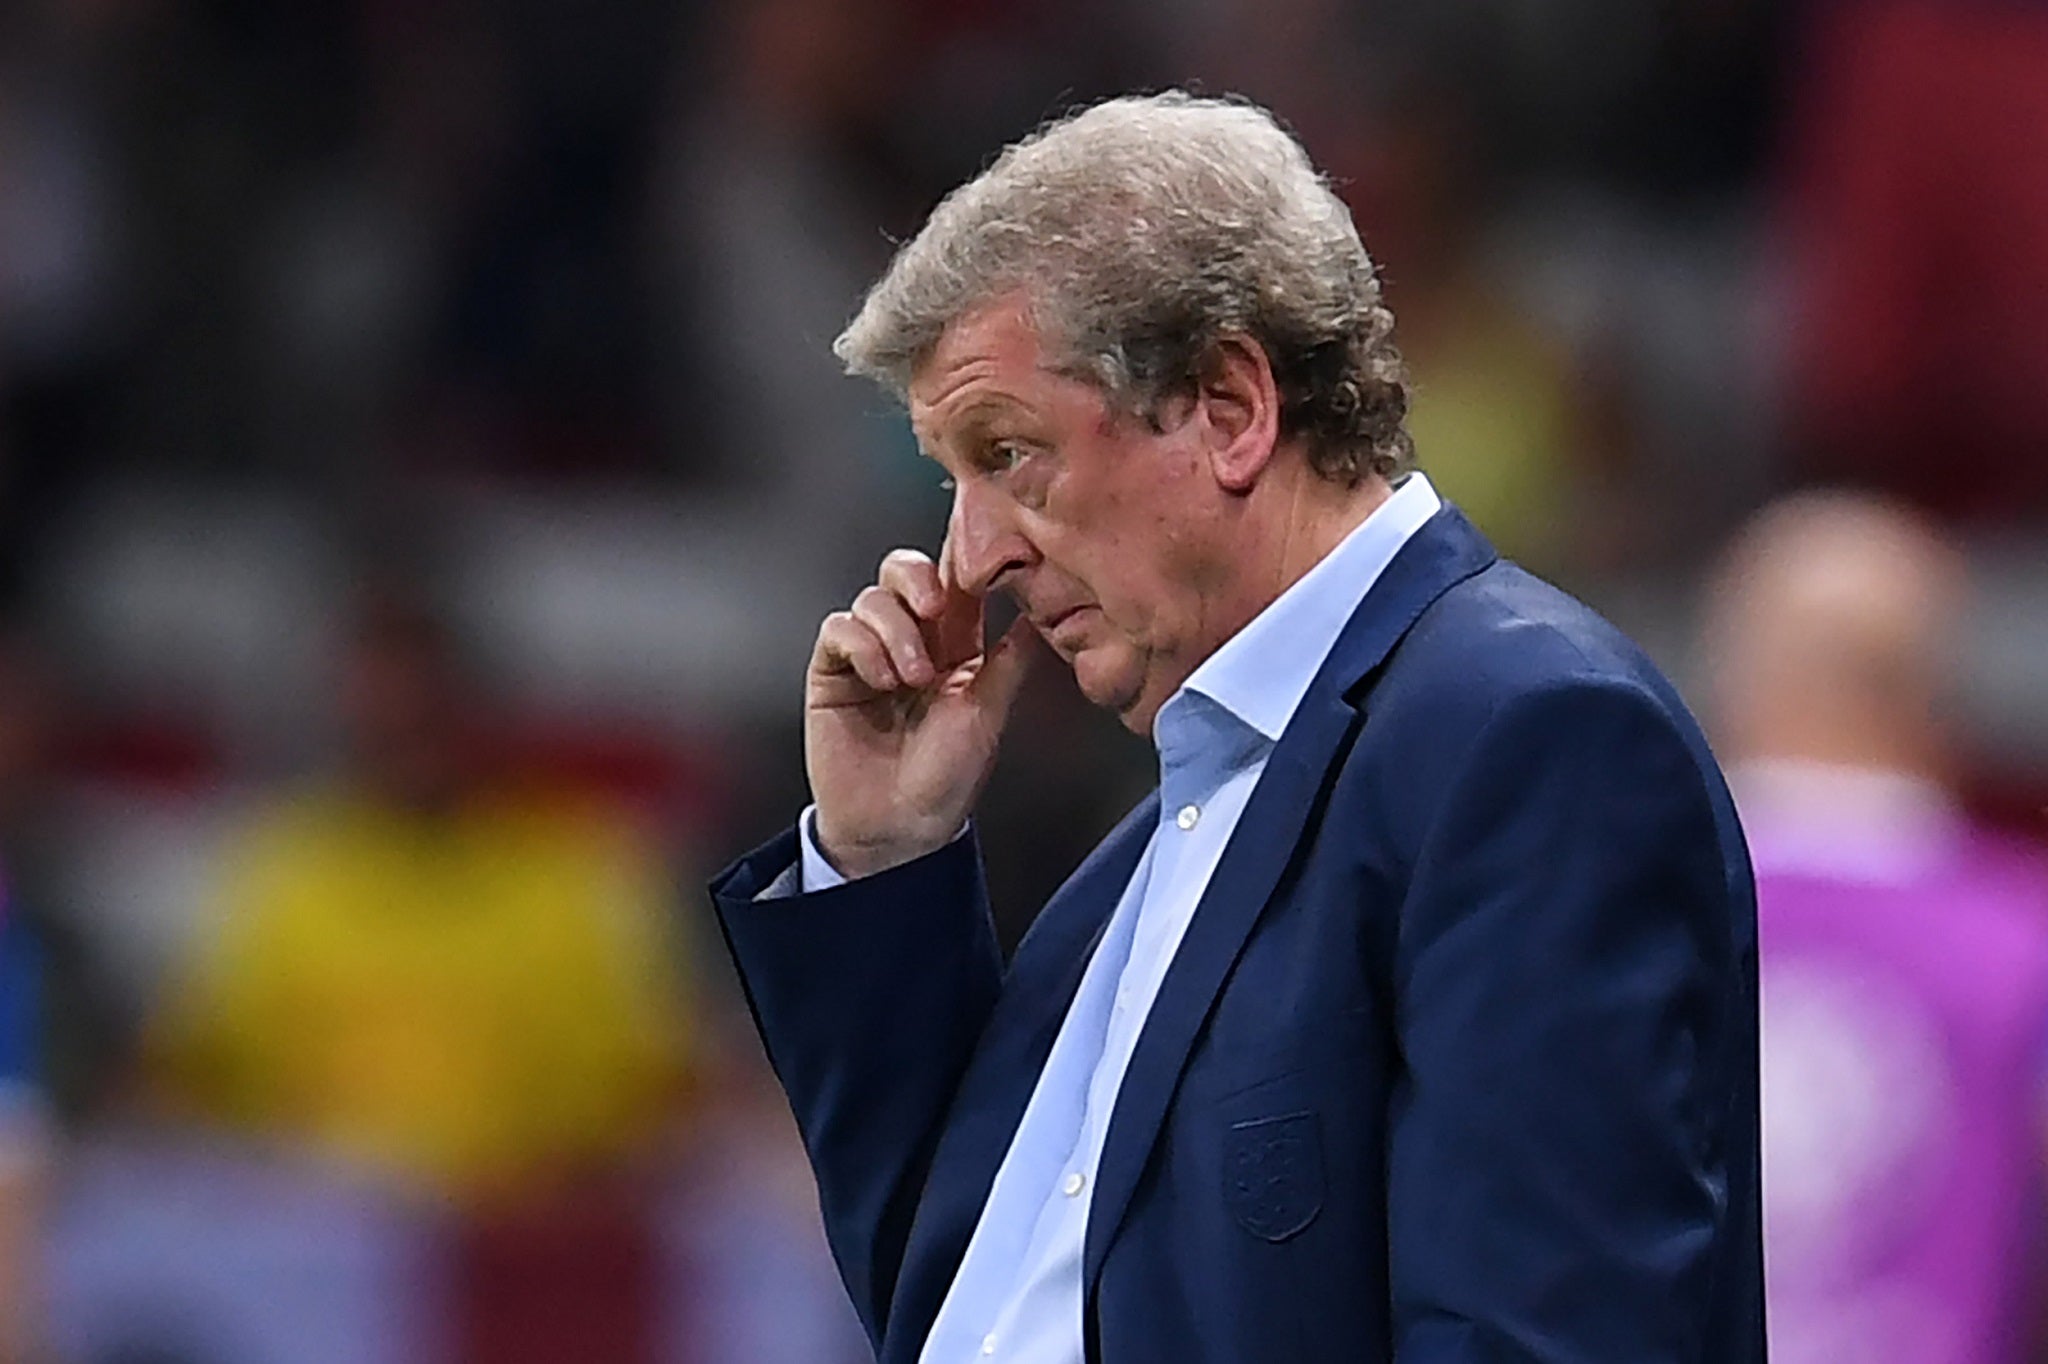 &#13;
The defeat cost Roy Hodgson his job as England manager &#13;